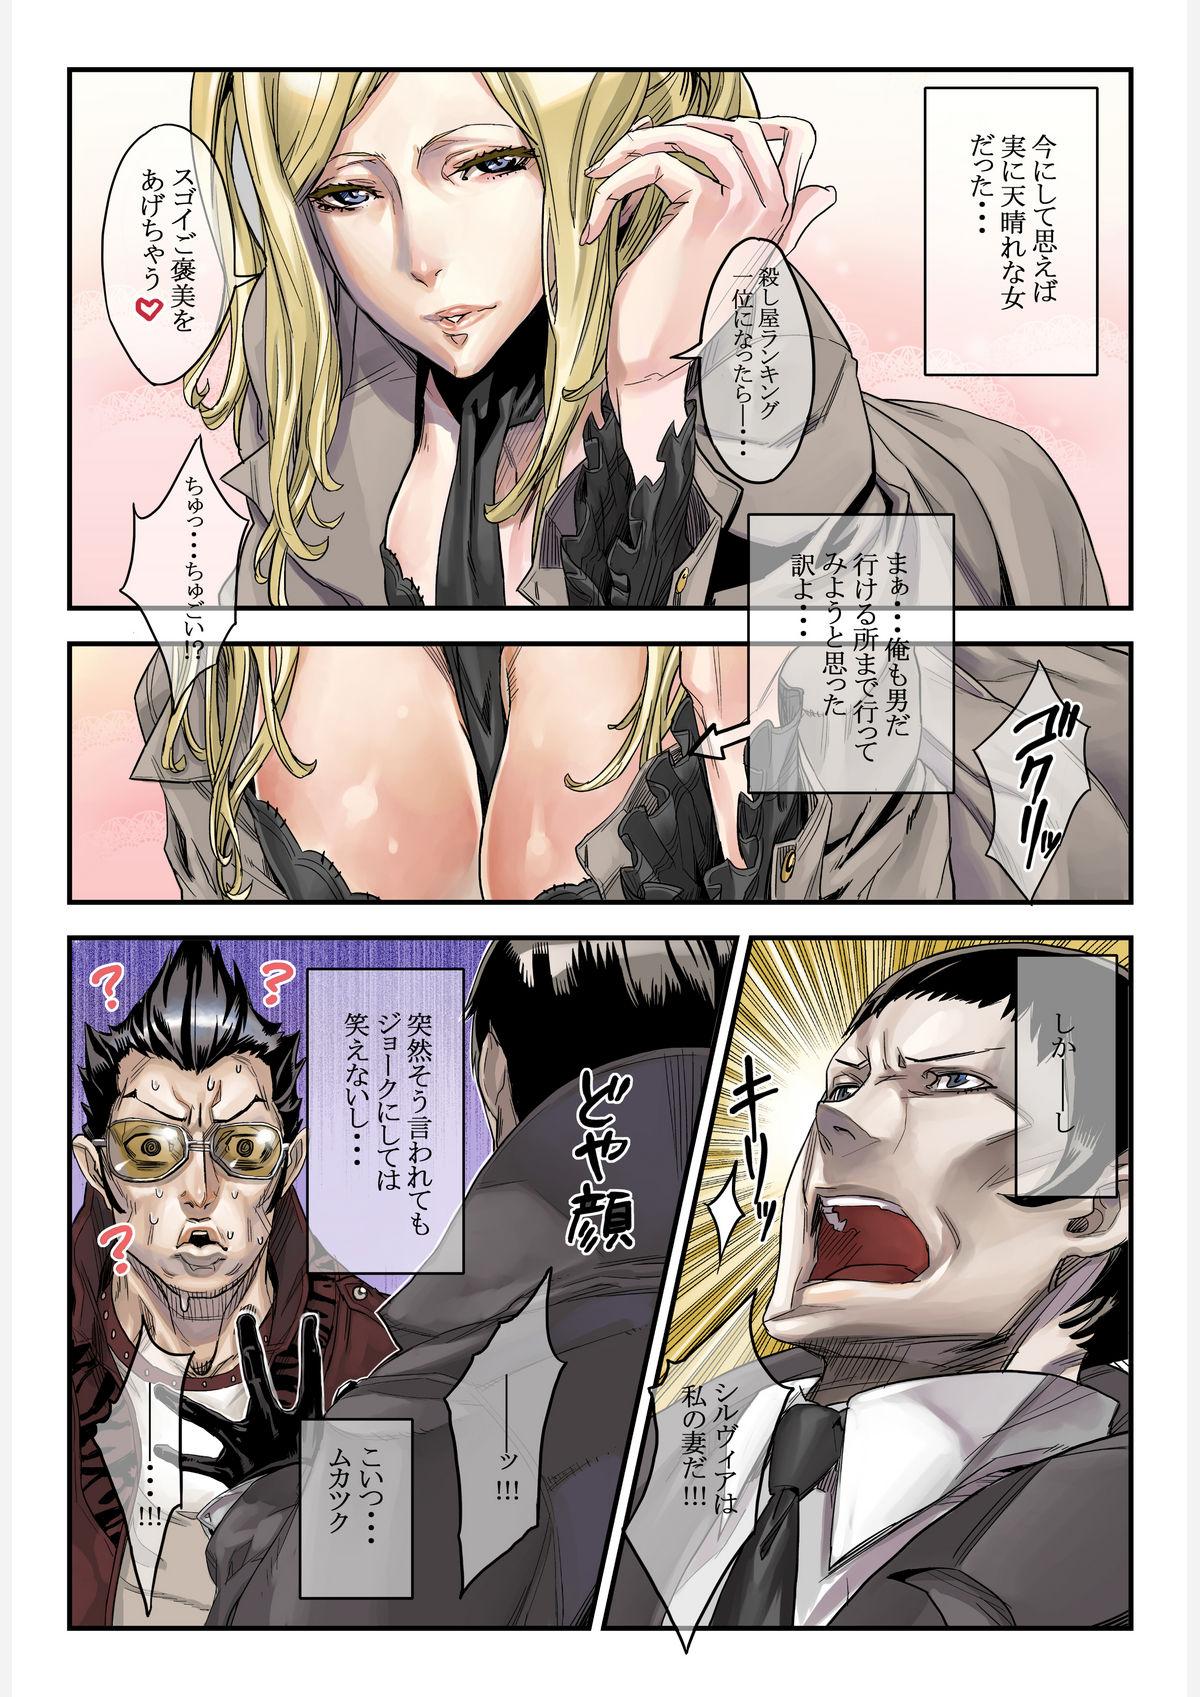 3some ONE MORE HEROES - No more heroes Male - Page 2